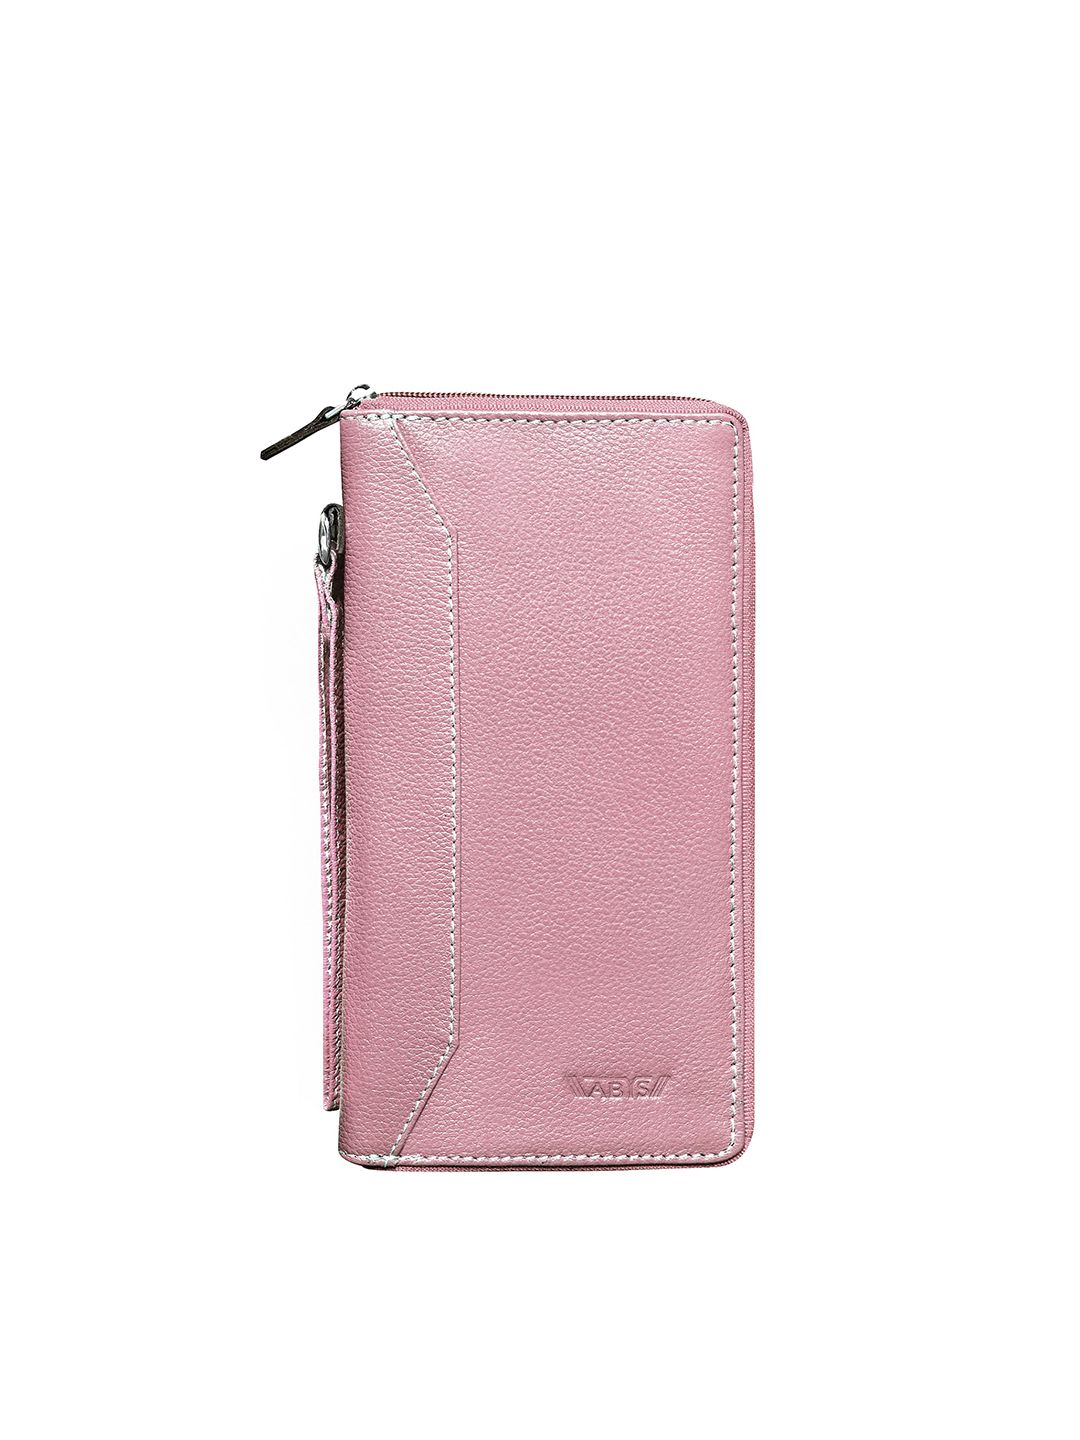 ABYS Unisex Pink & White Textured Leather Passport Holder Price in India